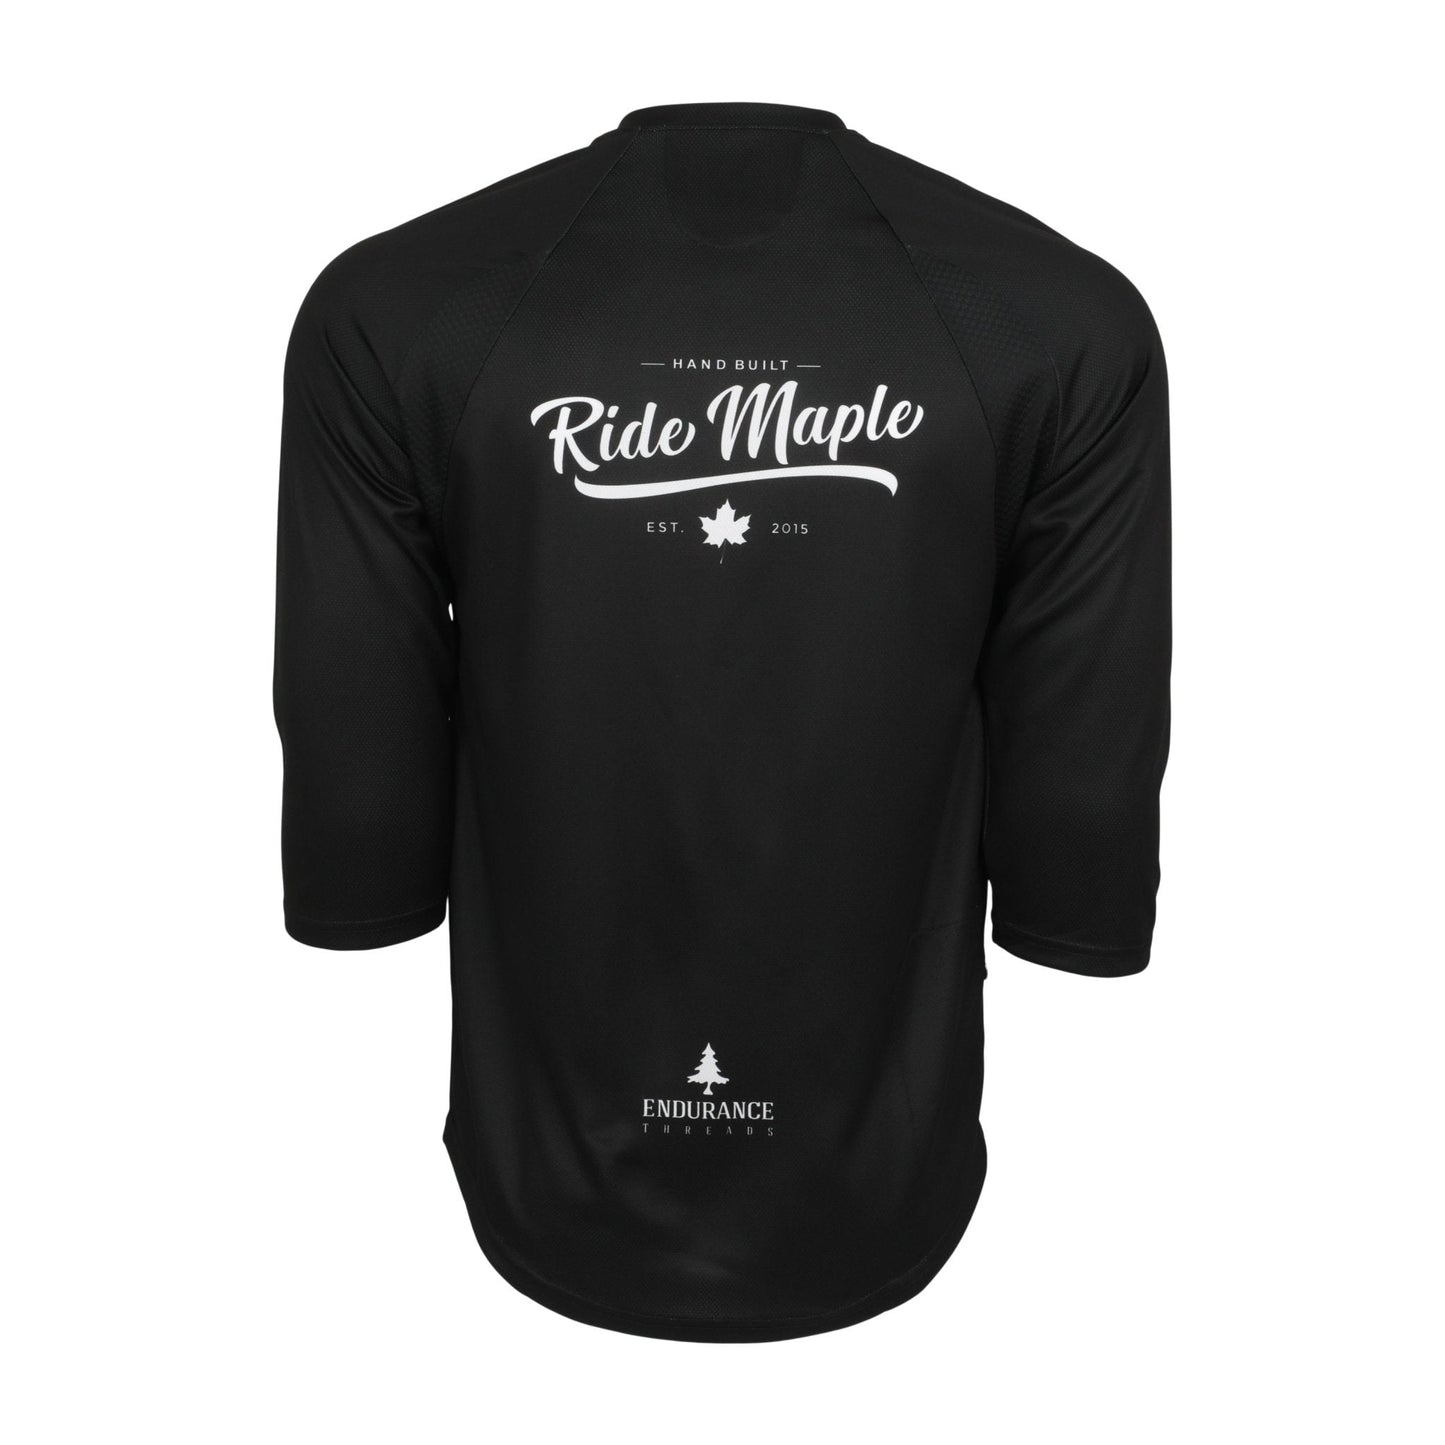 Classy Ride Maple SendIt MTB 3/4 Jersey - Relaxed Fit (Final Sale) - Ride Maple